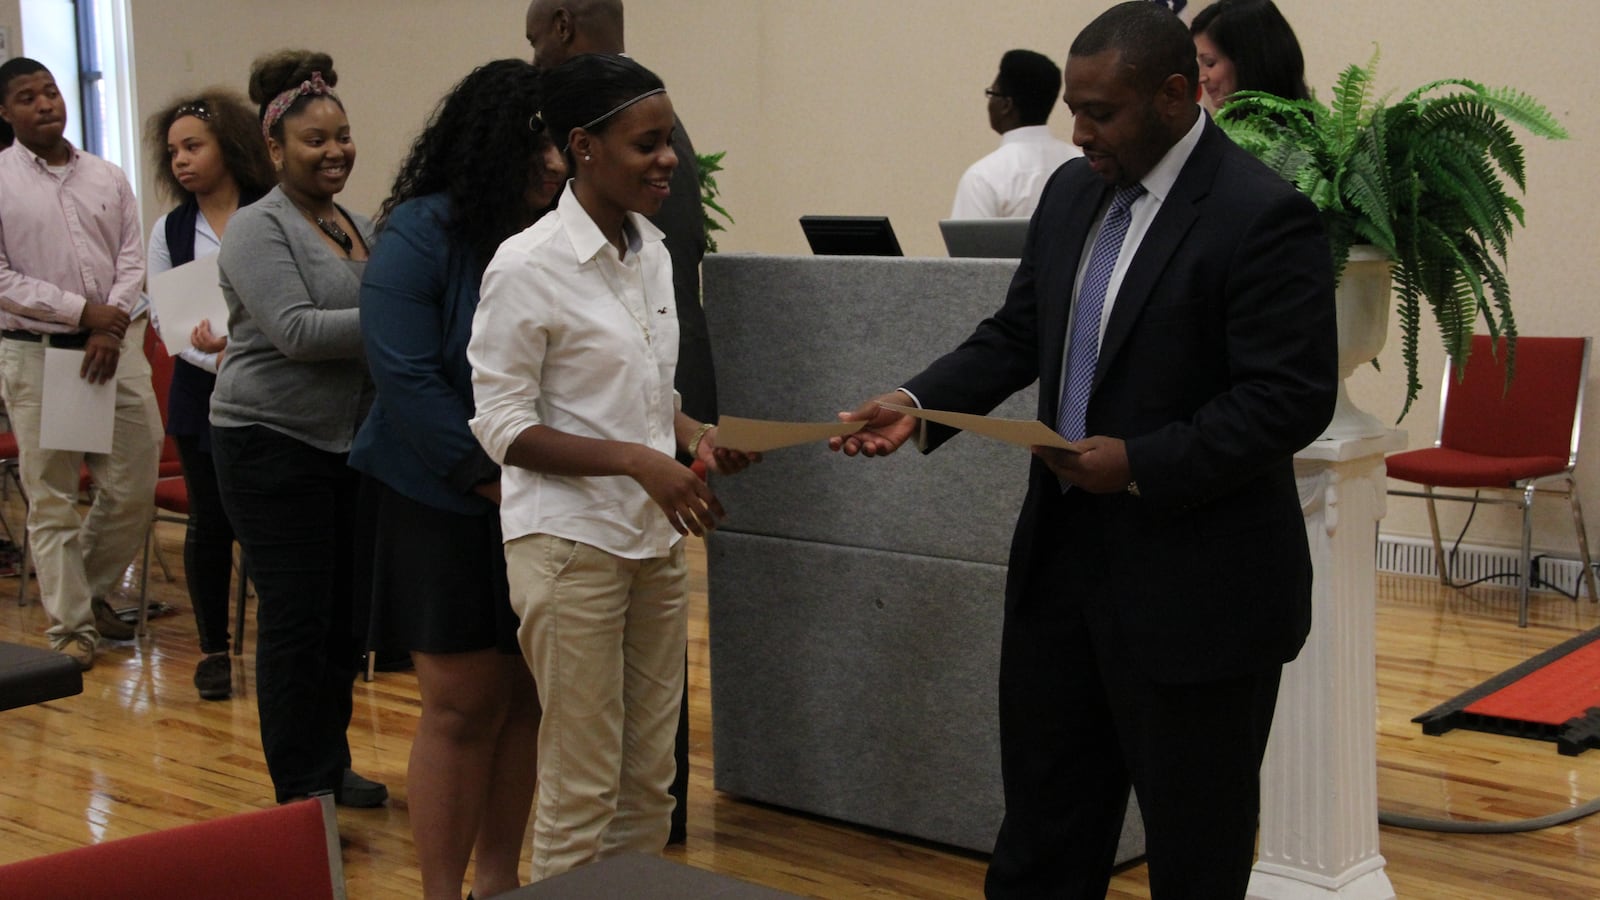 Memphis students receive congratulations Thursday from Shelby County Schools board member Kevin Woods after earning an IT certification following a summer learning program.